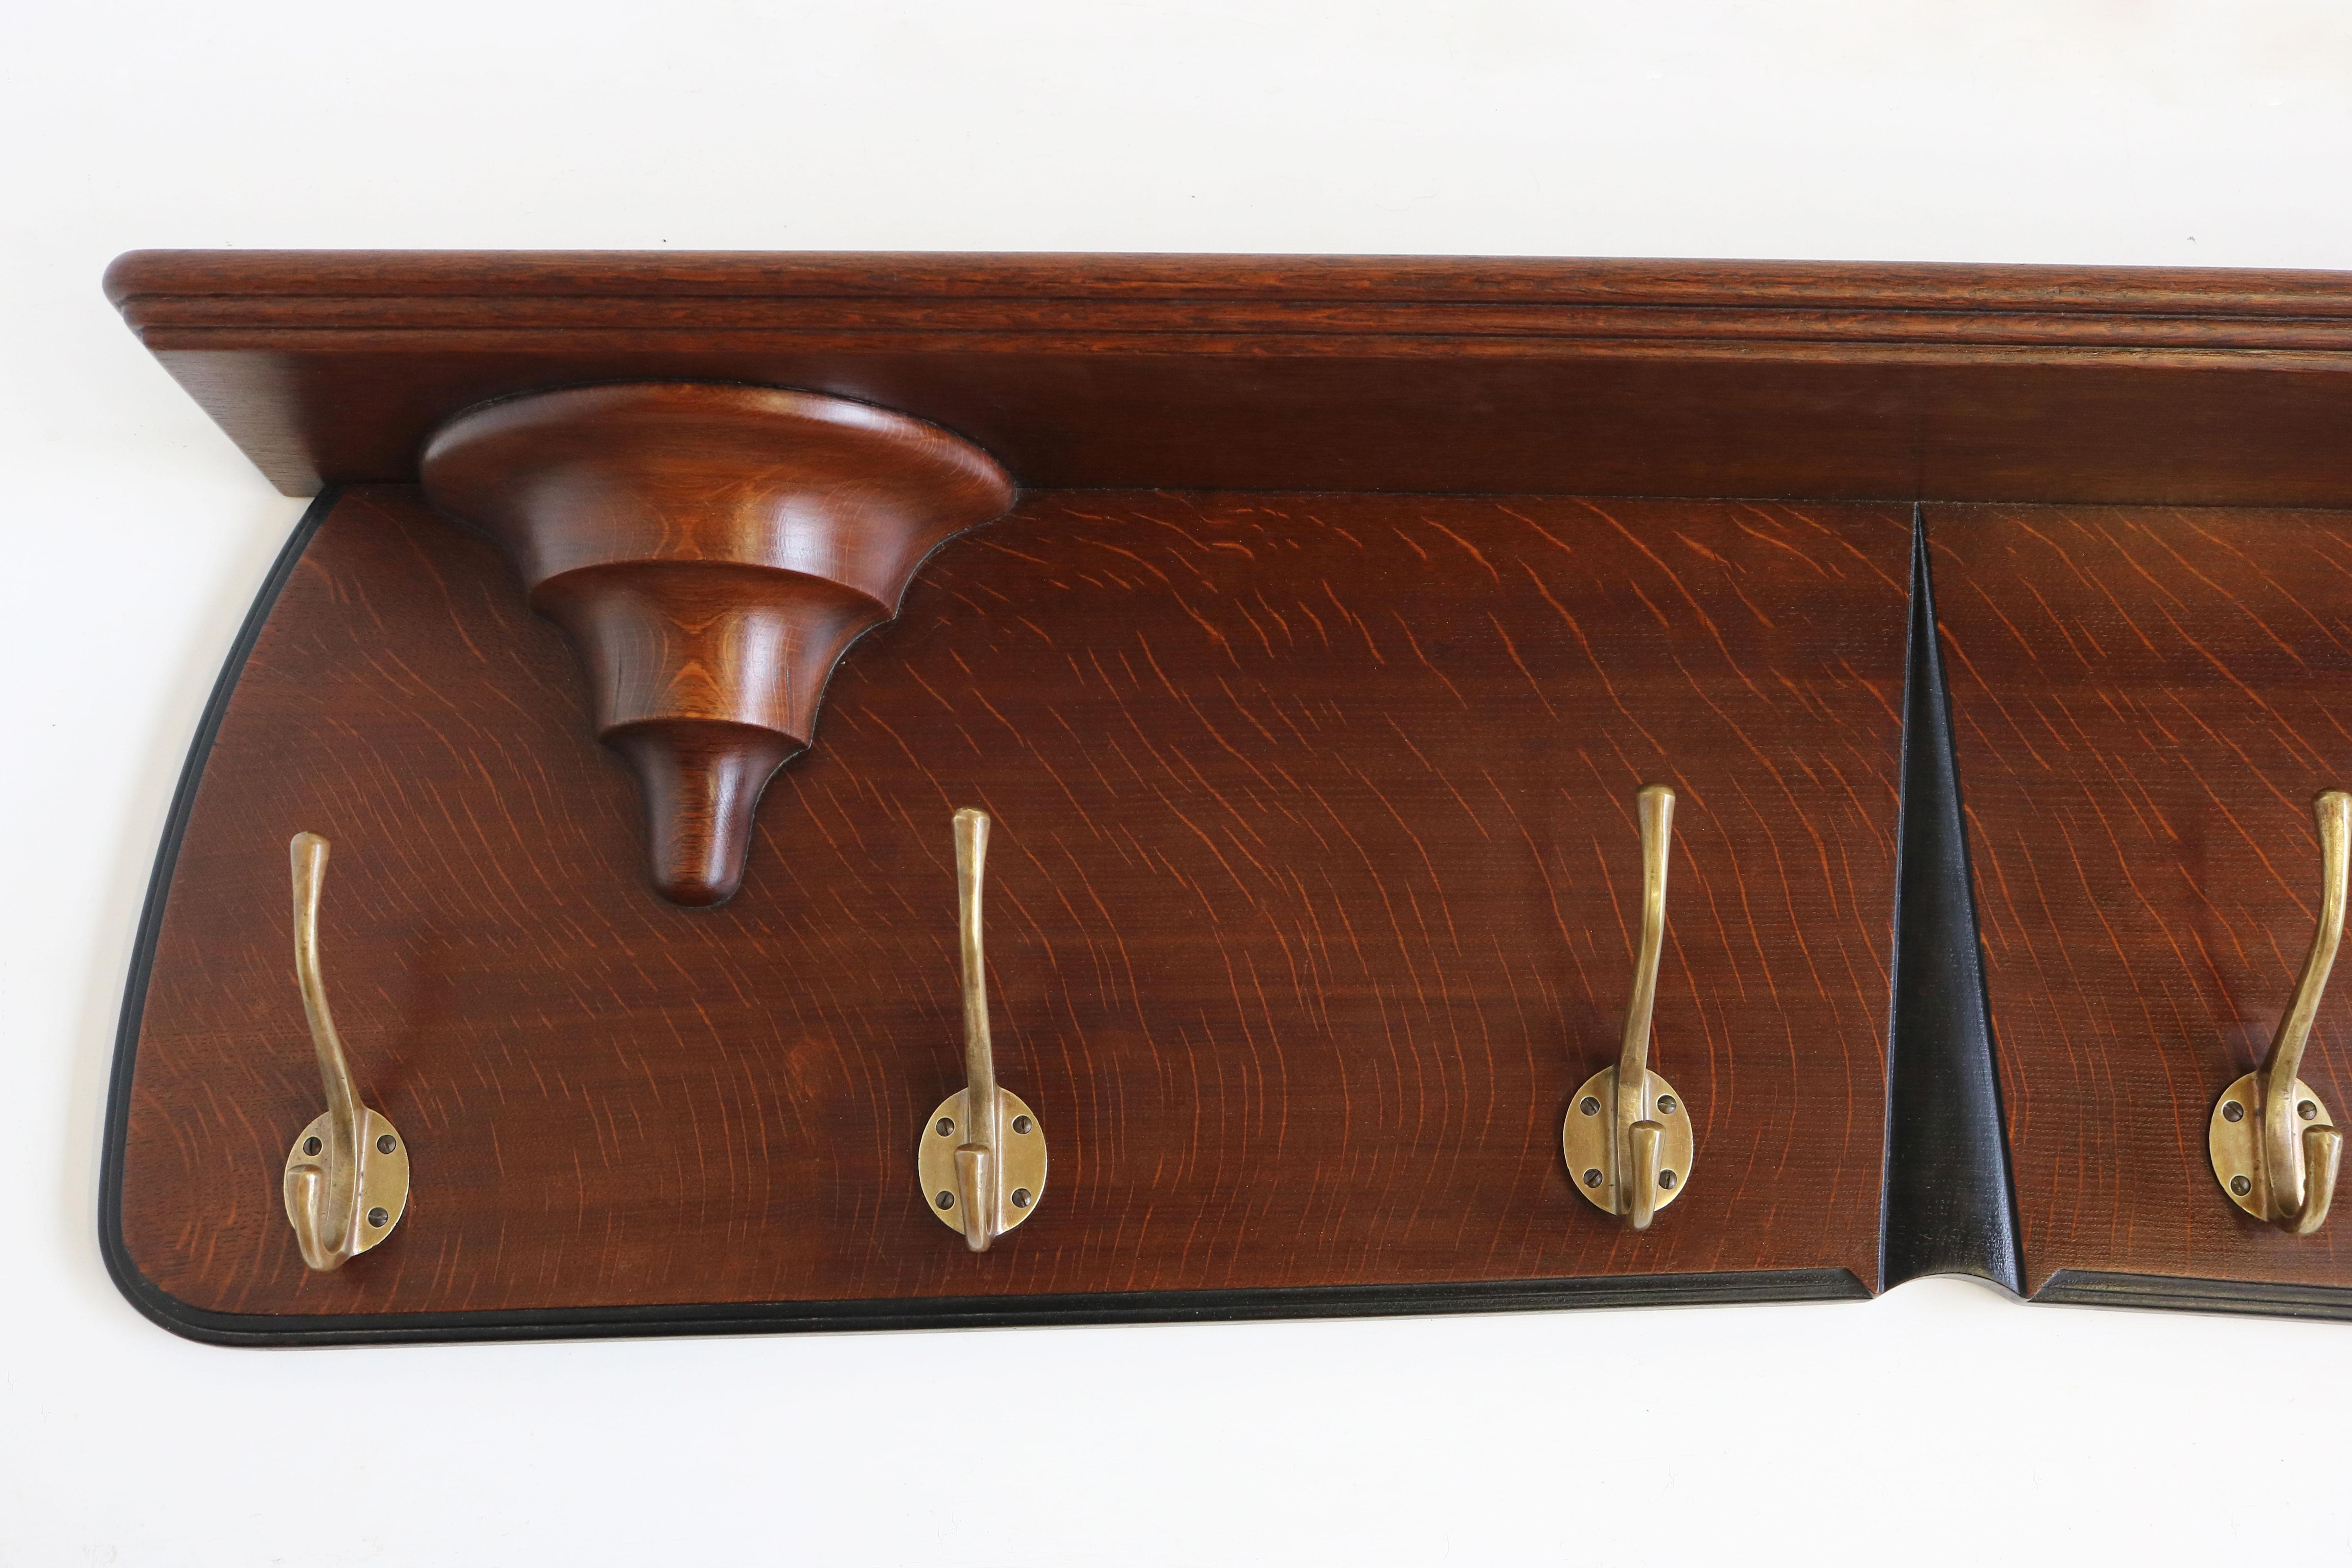 Exquisite & Timeless! This Dutch design Art Deco Amsterdam school style Coat rack by Hildo Krop.
Hildo Krop is one of the most famous Amsterdam school designers and this coat rack perfectly displays why. 
The use of the tiger oak combined with the